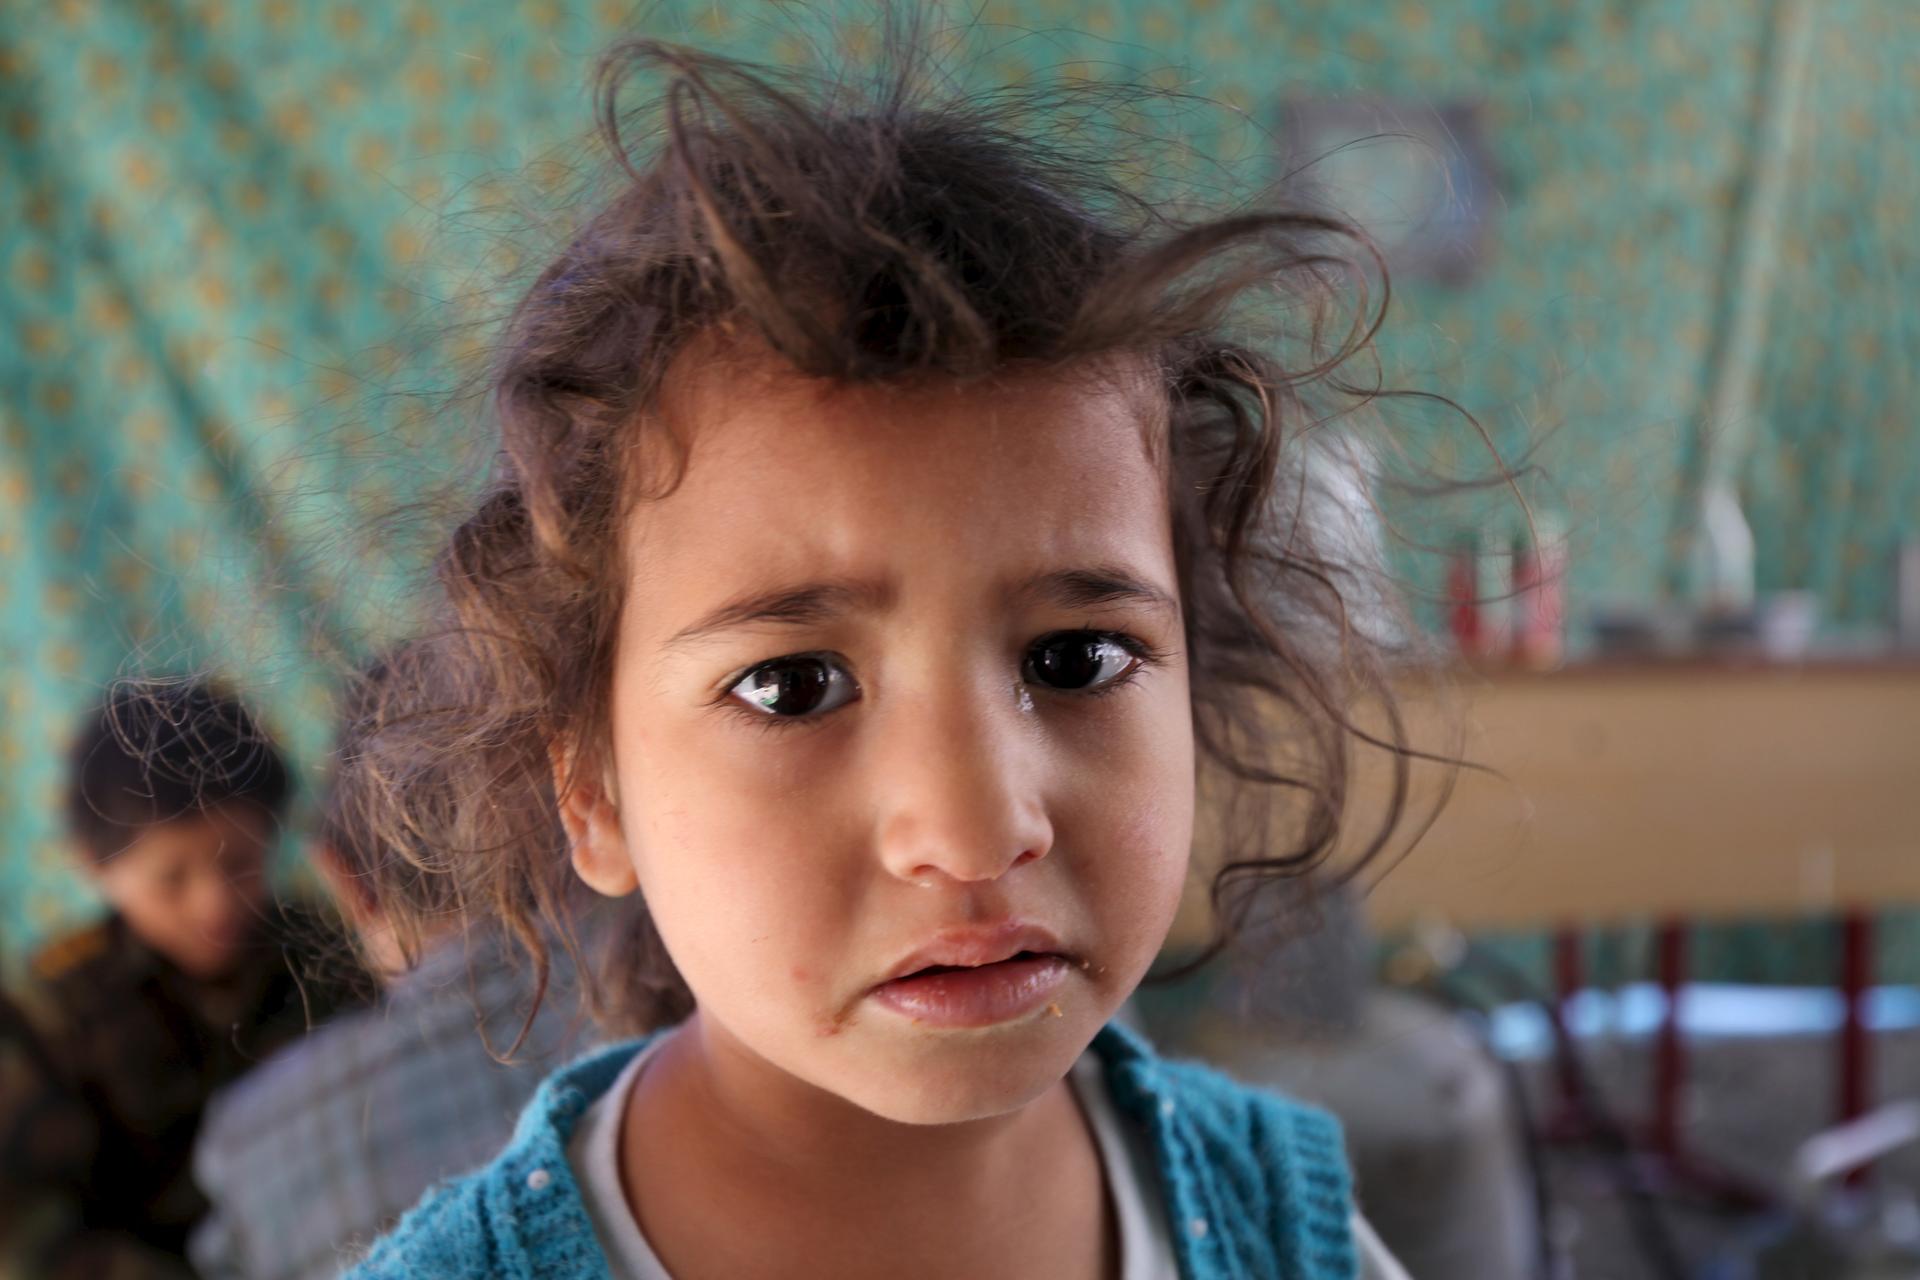 An internally displaced girl waits for her turn to receive food at a school in Sanaa May 17, 2015. Residents were forced to leave their homes in the nearby province of Saada amidst Saudi-led air strikes.